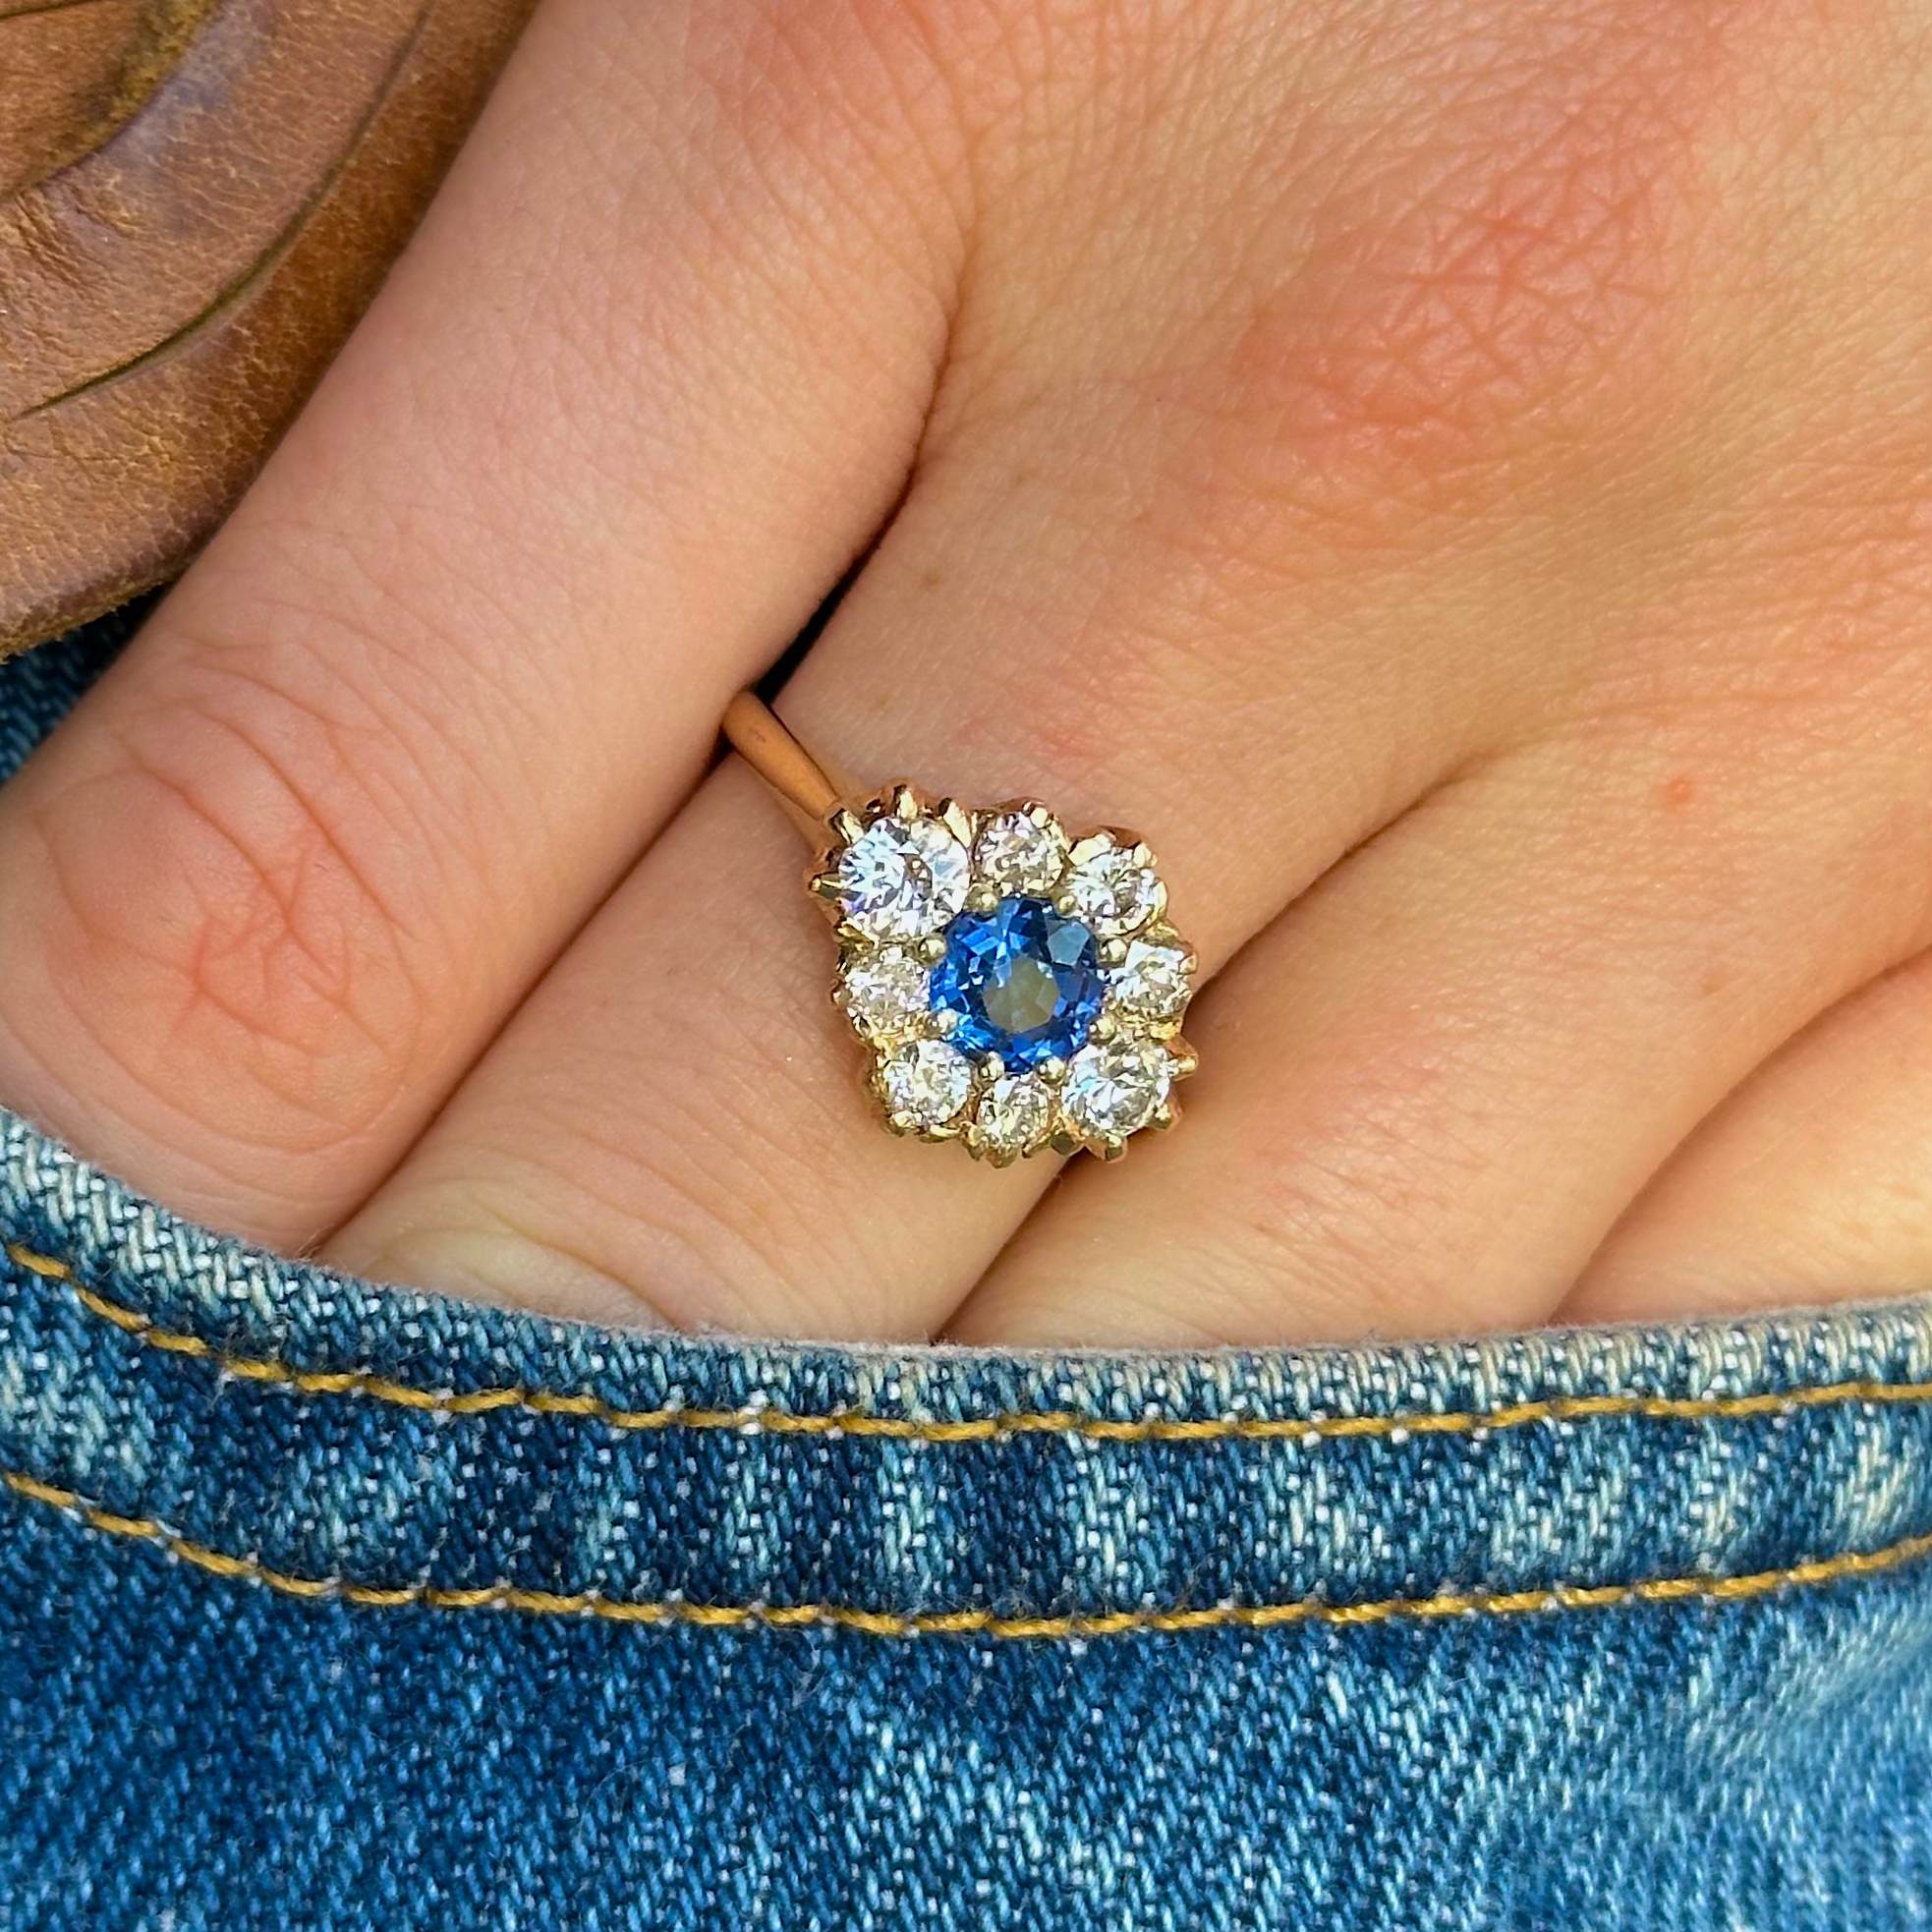 Vintage, Sapphire and Diamond Cluster Engagement Ring, 14ct Yellow Gold worn on hand in pocket of jeans